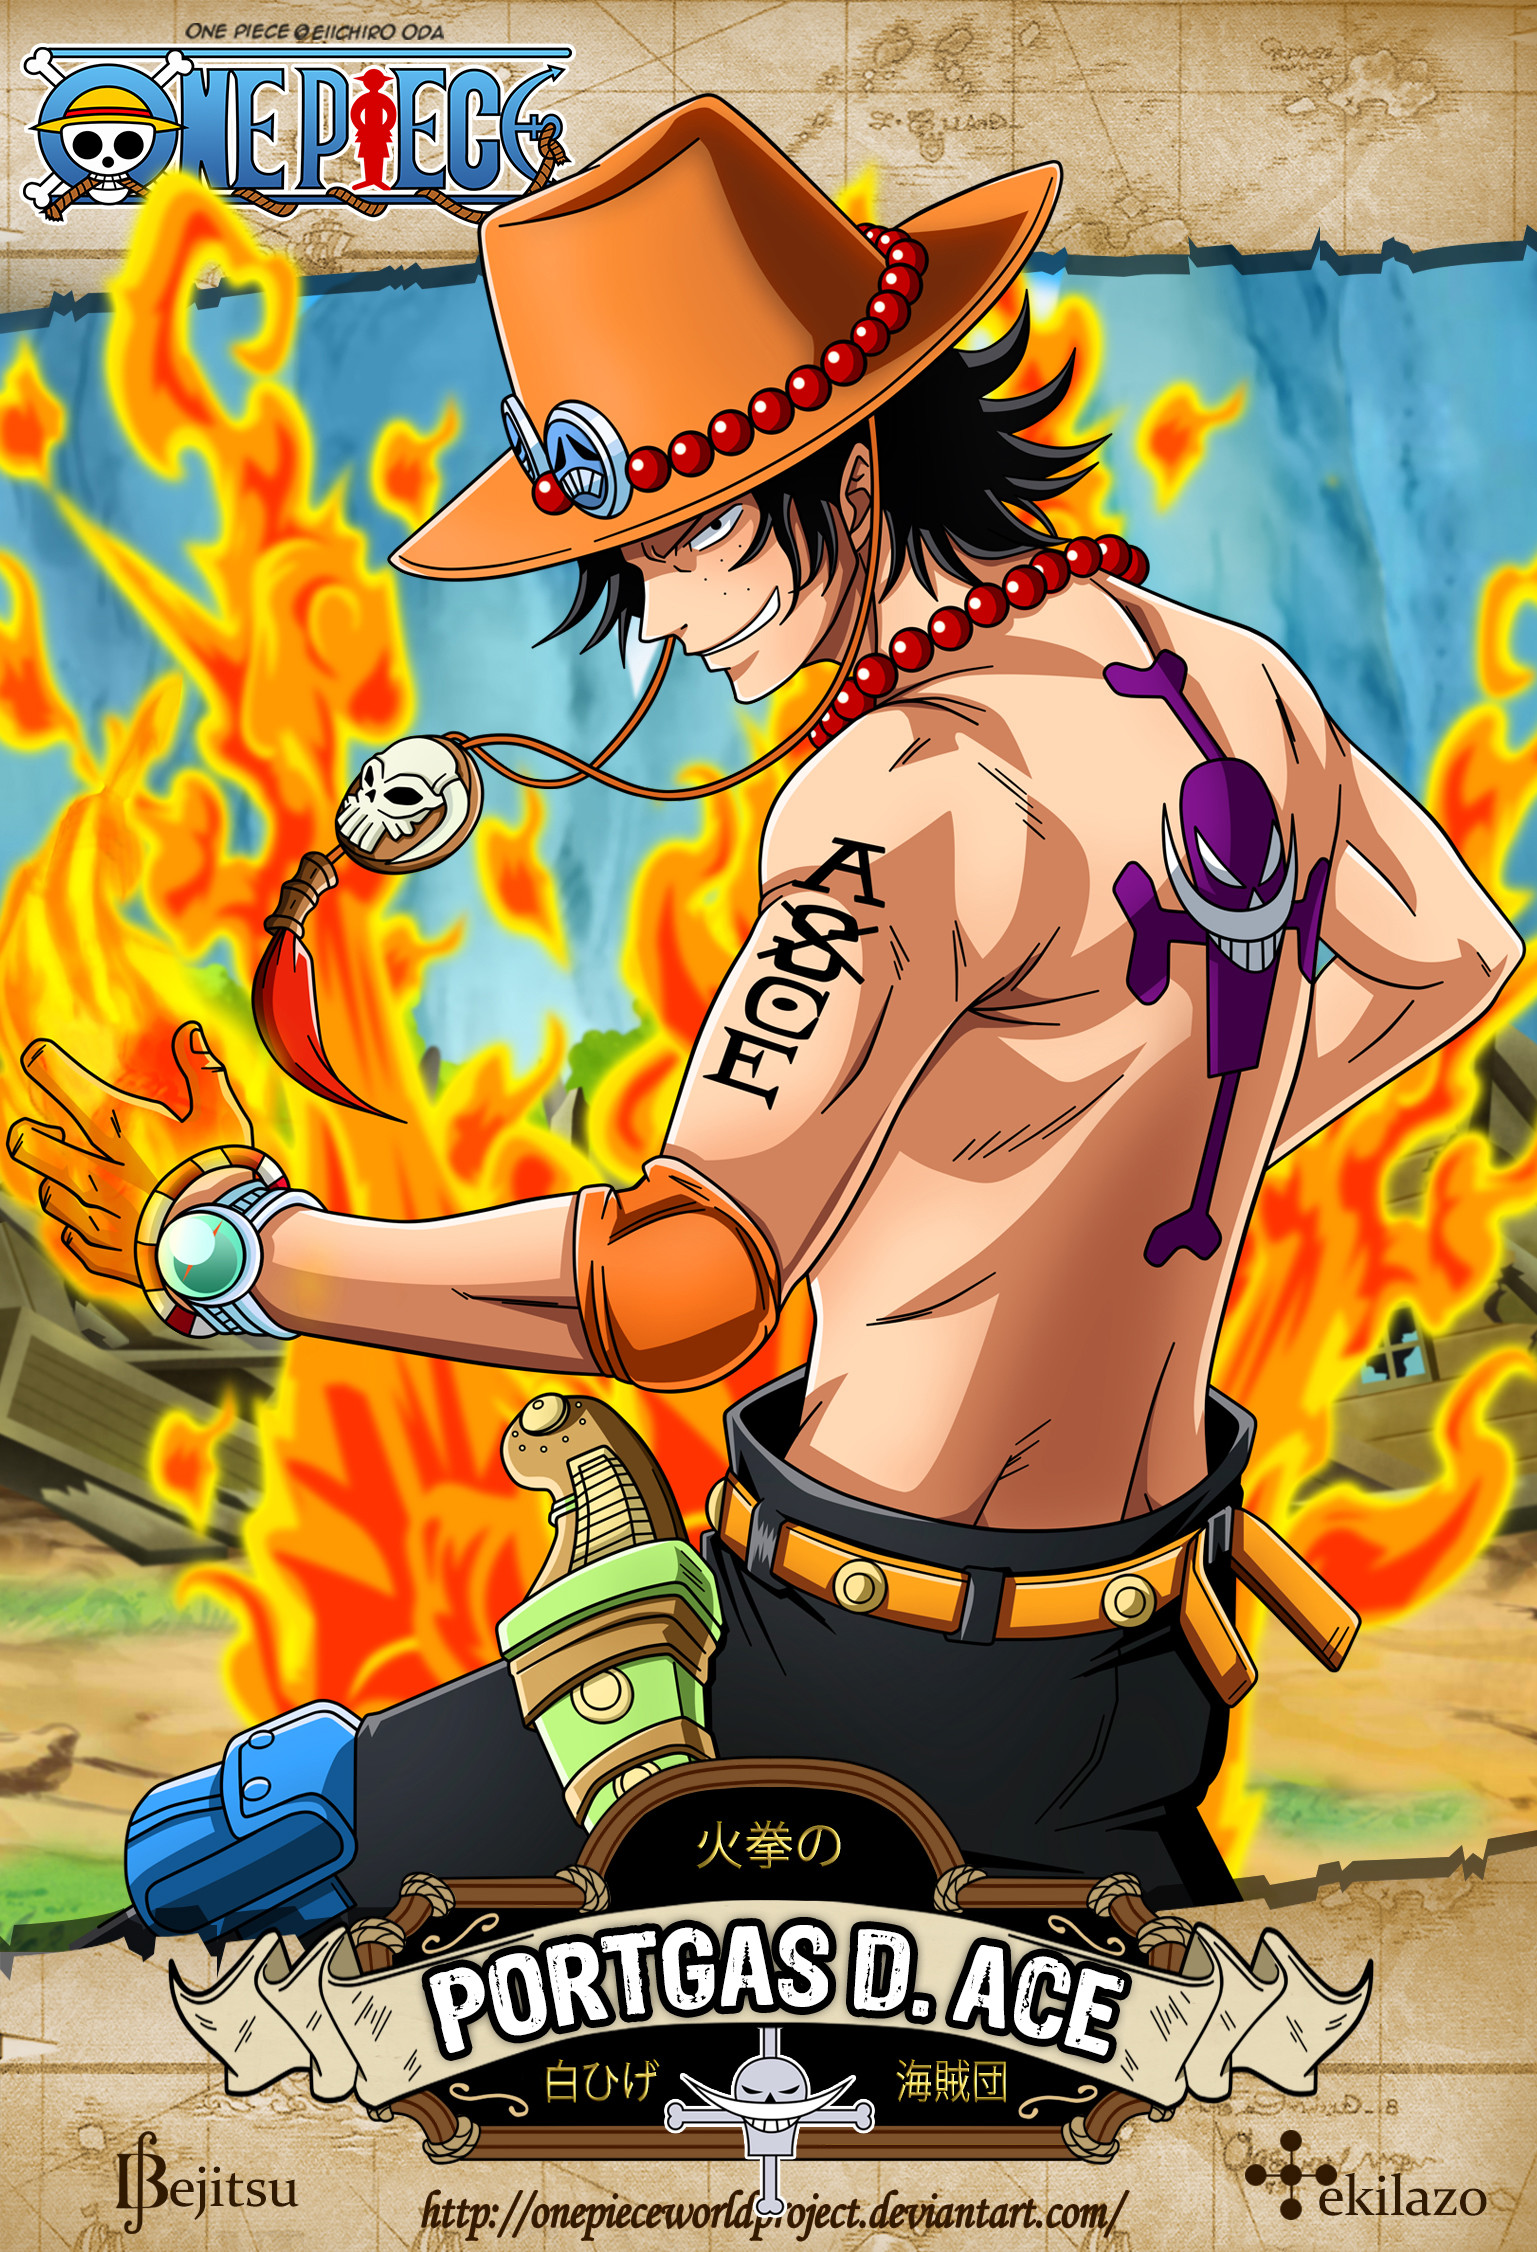 1537x2252 Tags: Anime, Onepieceworldproject, ONE PIECE, Portgas D. Ace, deviantART,